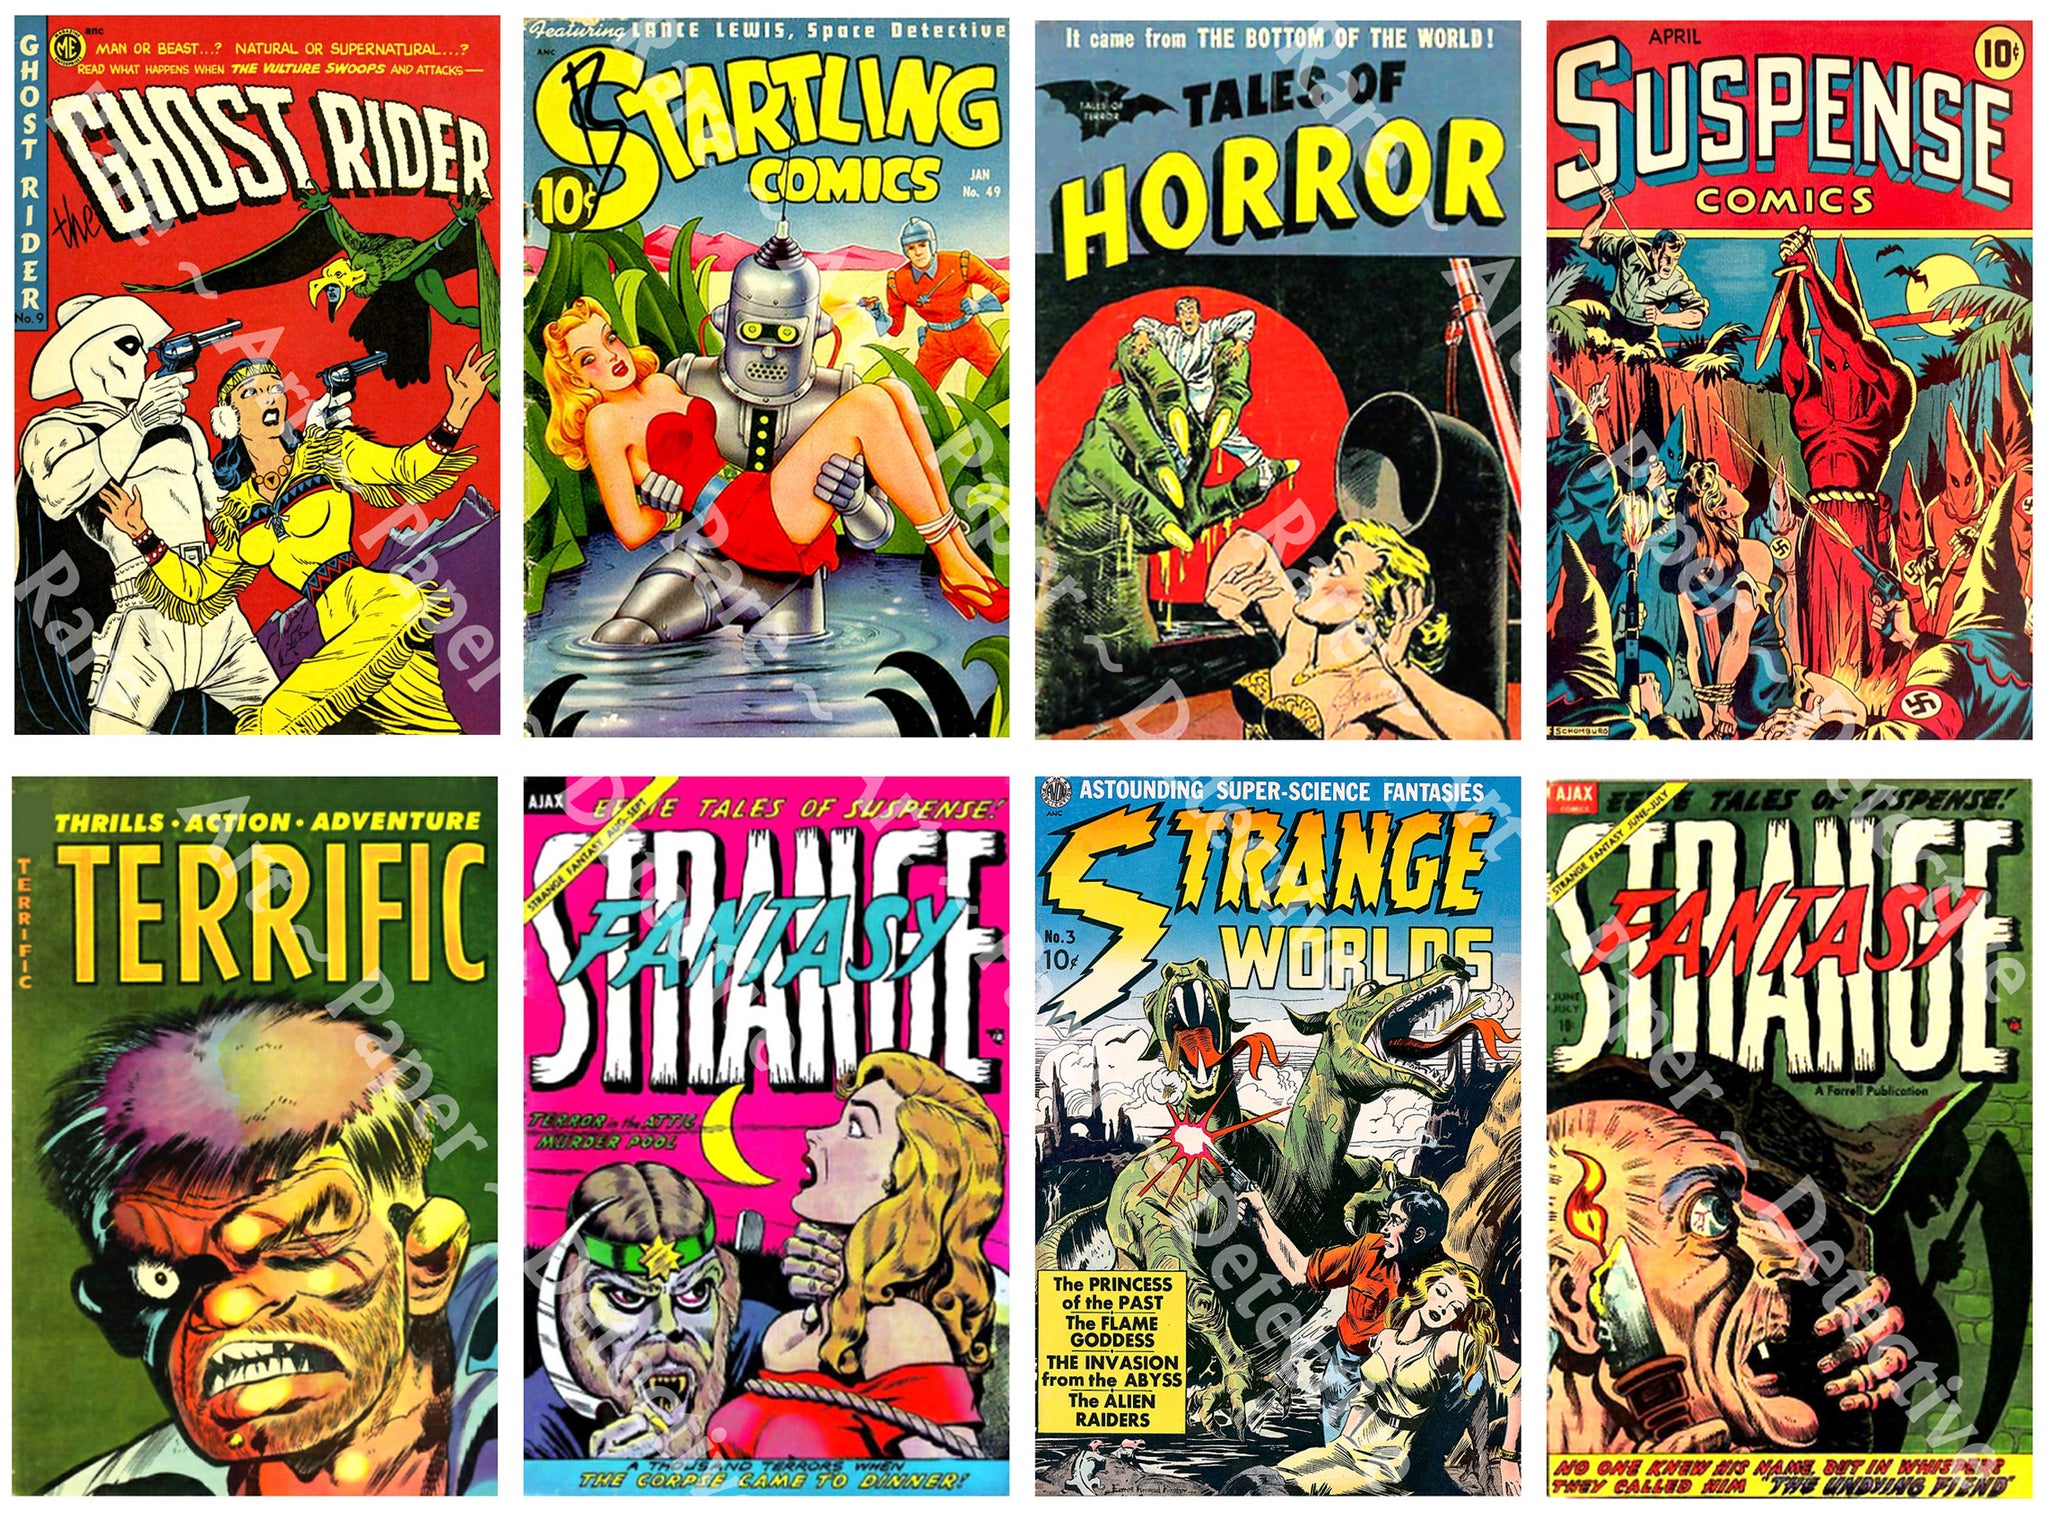 1950's Horror Comic Book Covers, Classic Horror Comics, Vintage Halloween Sticker Décor, 2.5" x 4" Tags, DIY Projects and Décor, CUT & PEEL Sheet, 1180